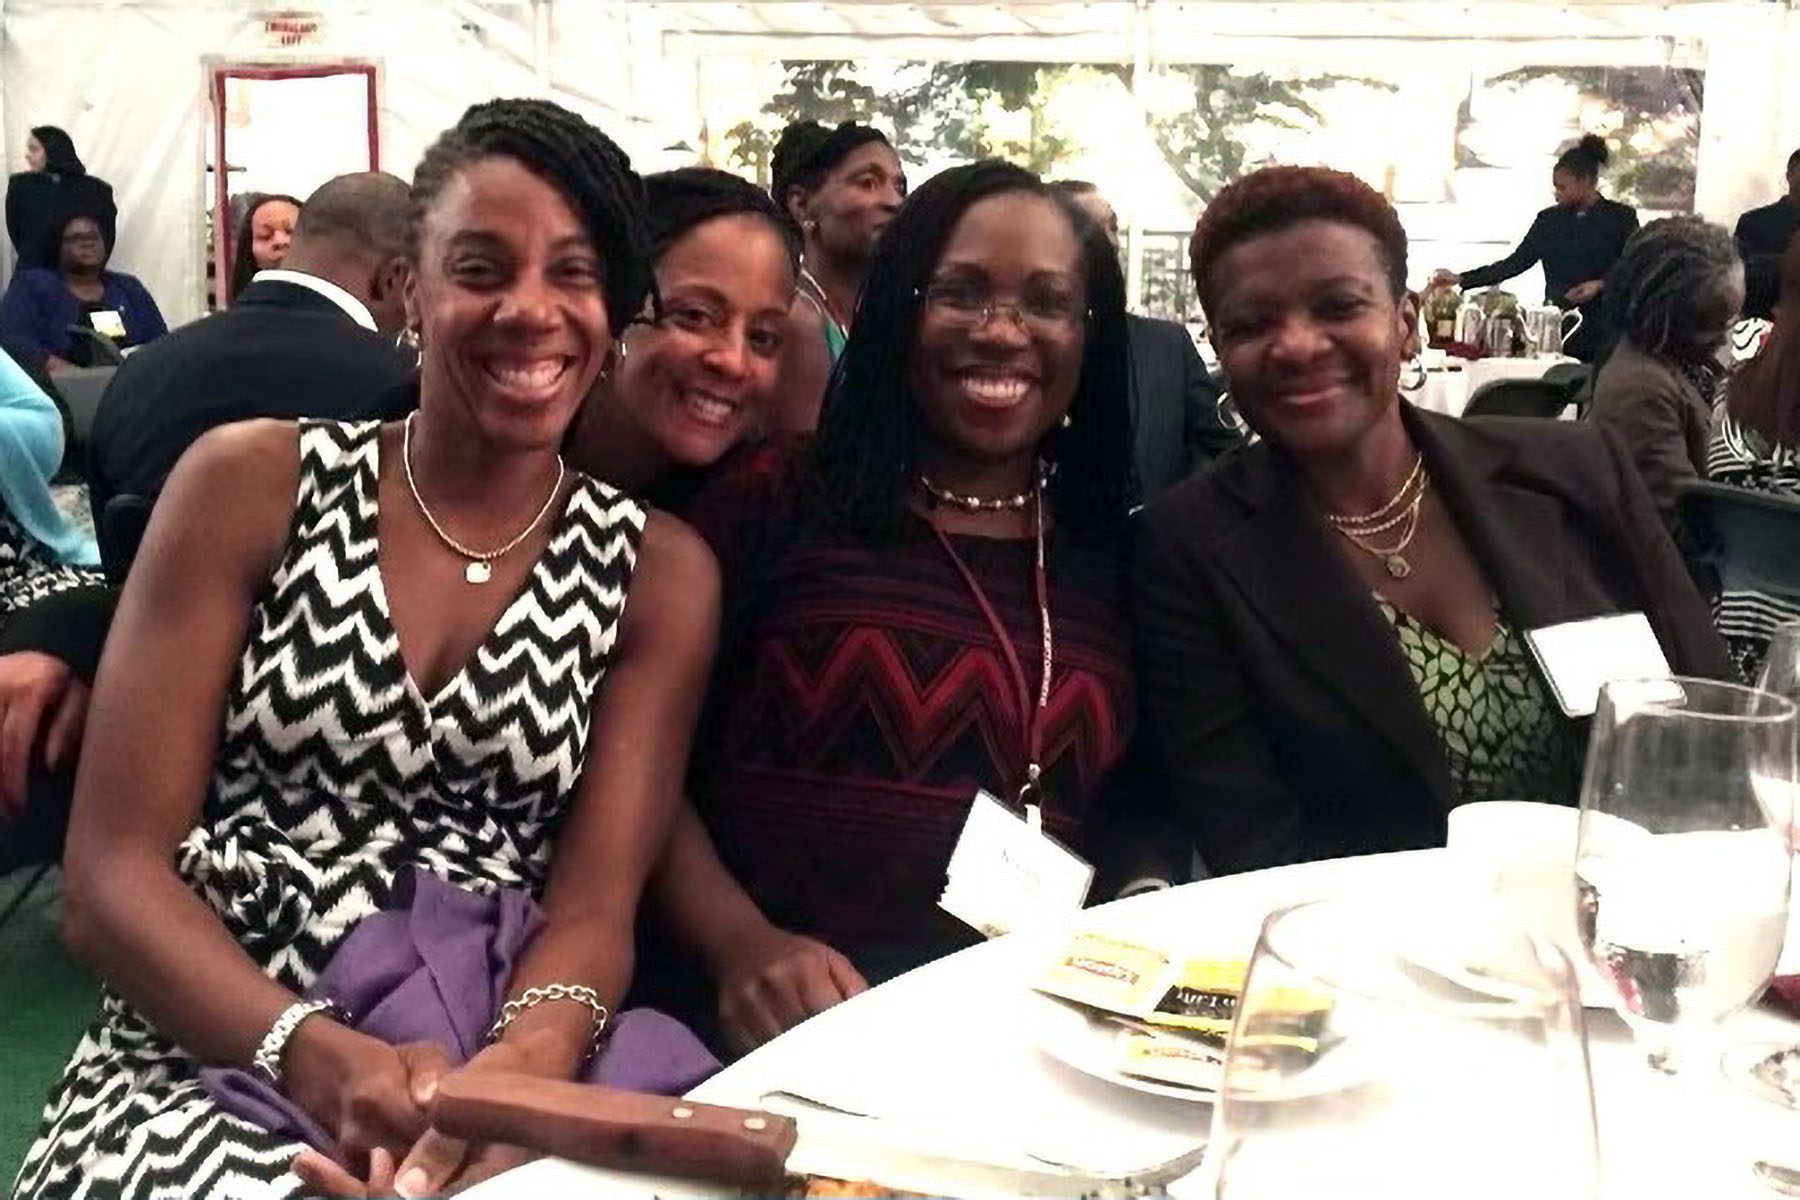 Lisa Fairfax, Nina Simmons, Ketanji Brown Jackson and Antoinette Coakley smile and pose for a picture at the Harvard Law School Celebration of Black Alumni.